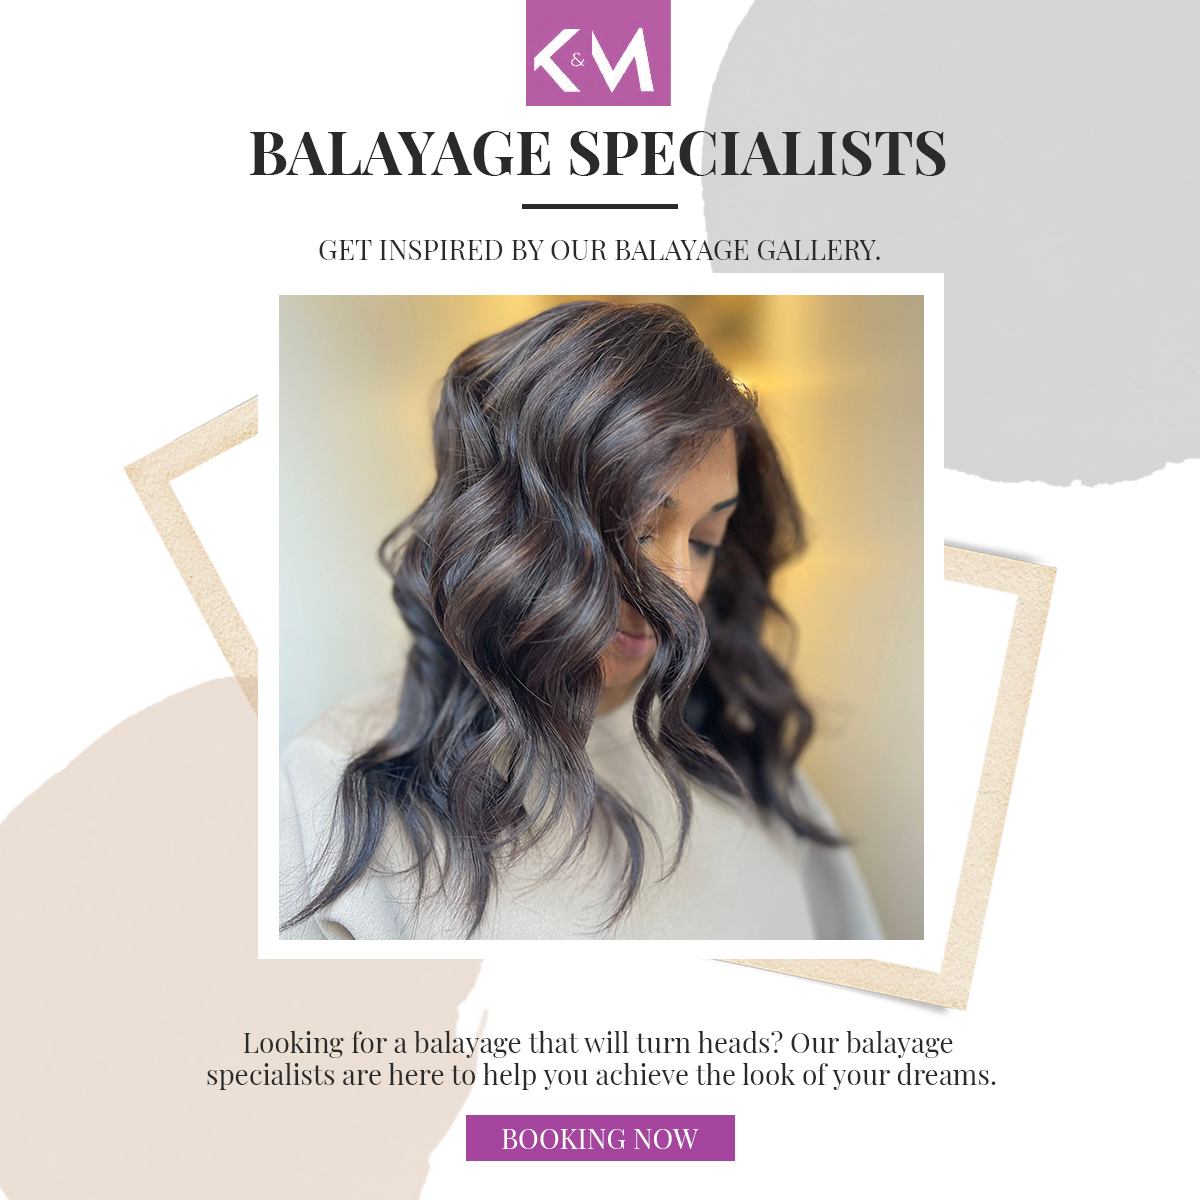 Looking for a balayage that will turn heads?
Our balayage specialists are here to help you achieve the look of your dreams.
Booking Now.

#balayage #balayagehair #balayagetransformation #ashbalayage #blondebalayage #brunettebalayage #haircolor #hairsalon #KMhairlounge #Virginia